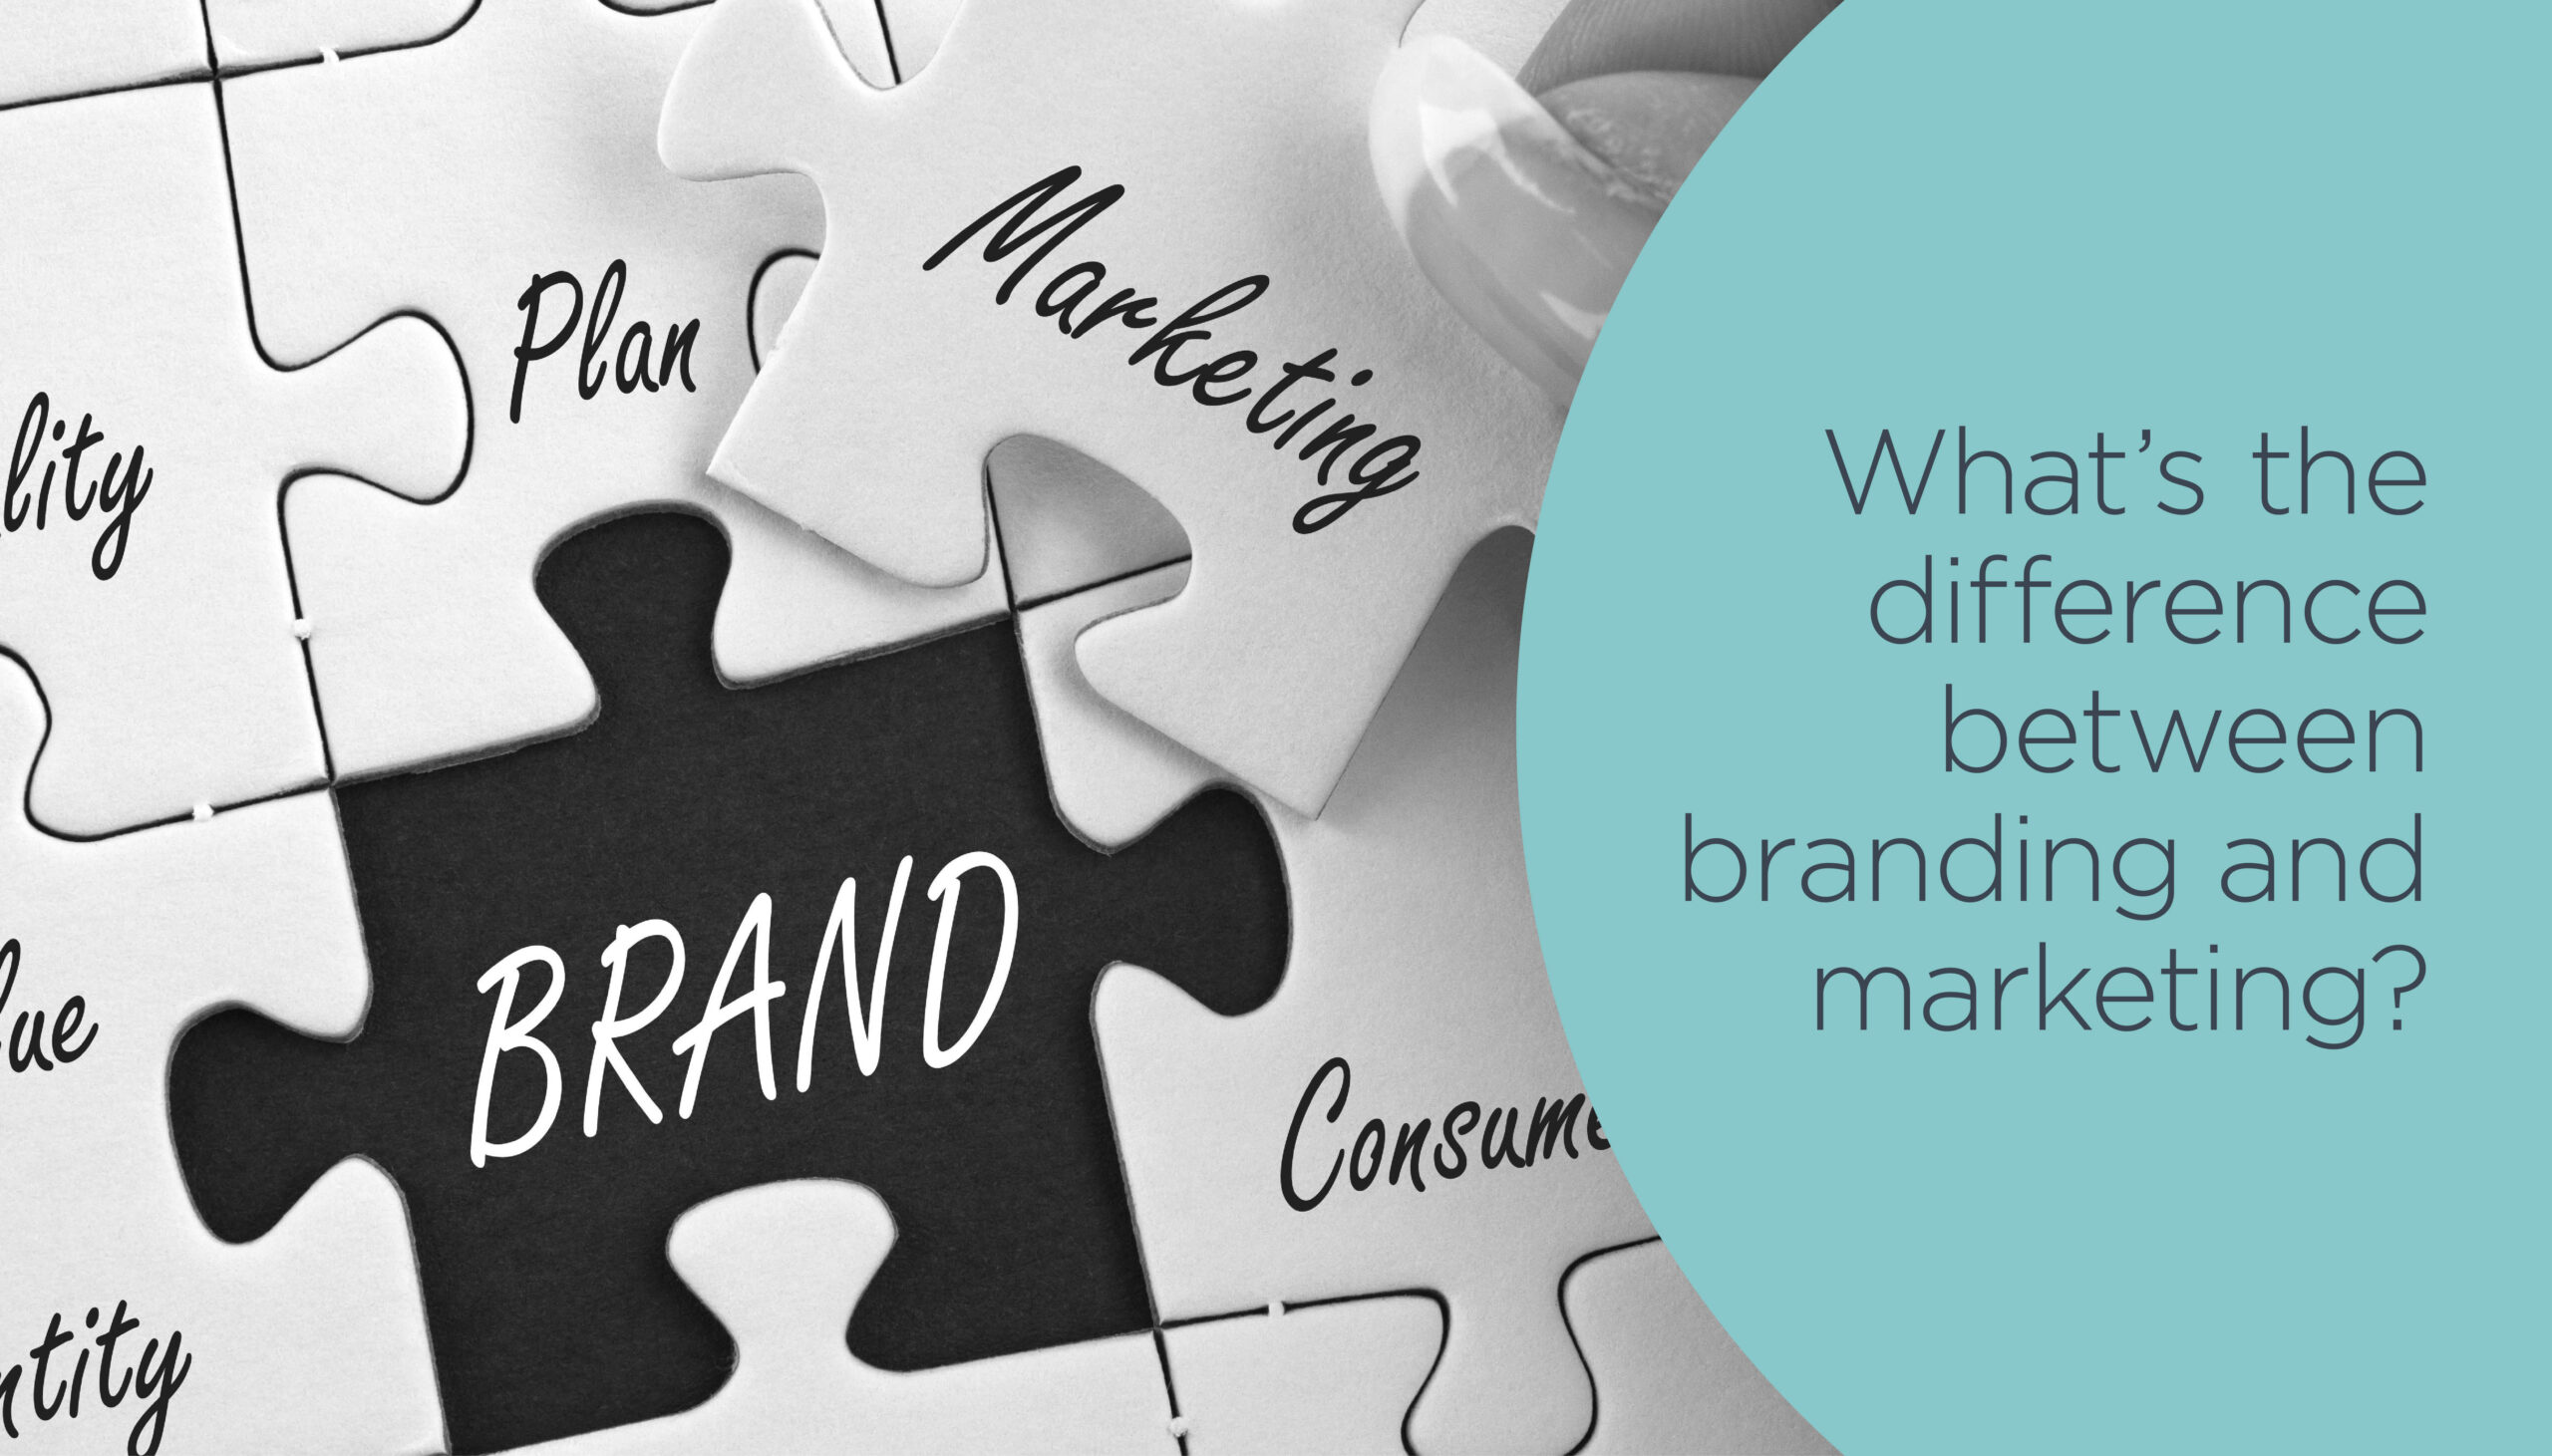 What's the difference between Branding and Marketing?